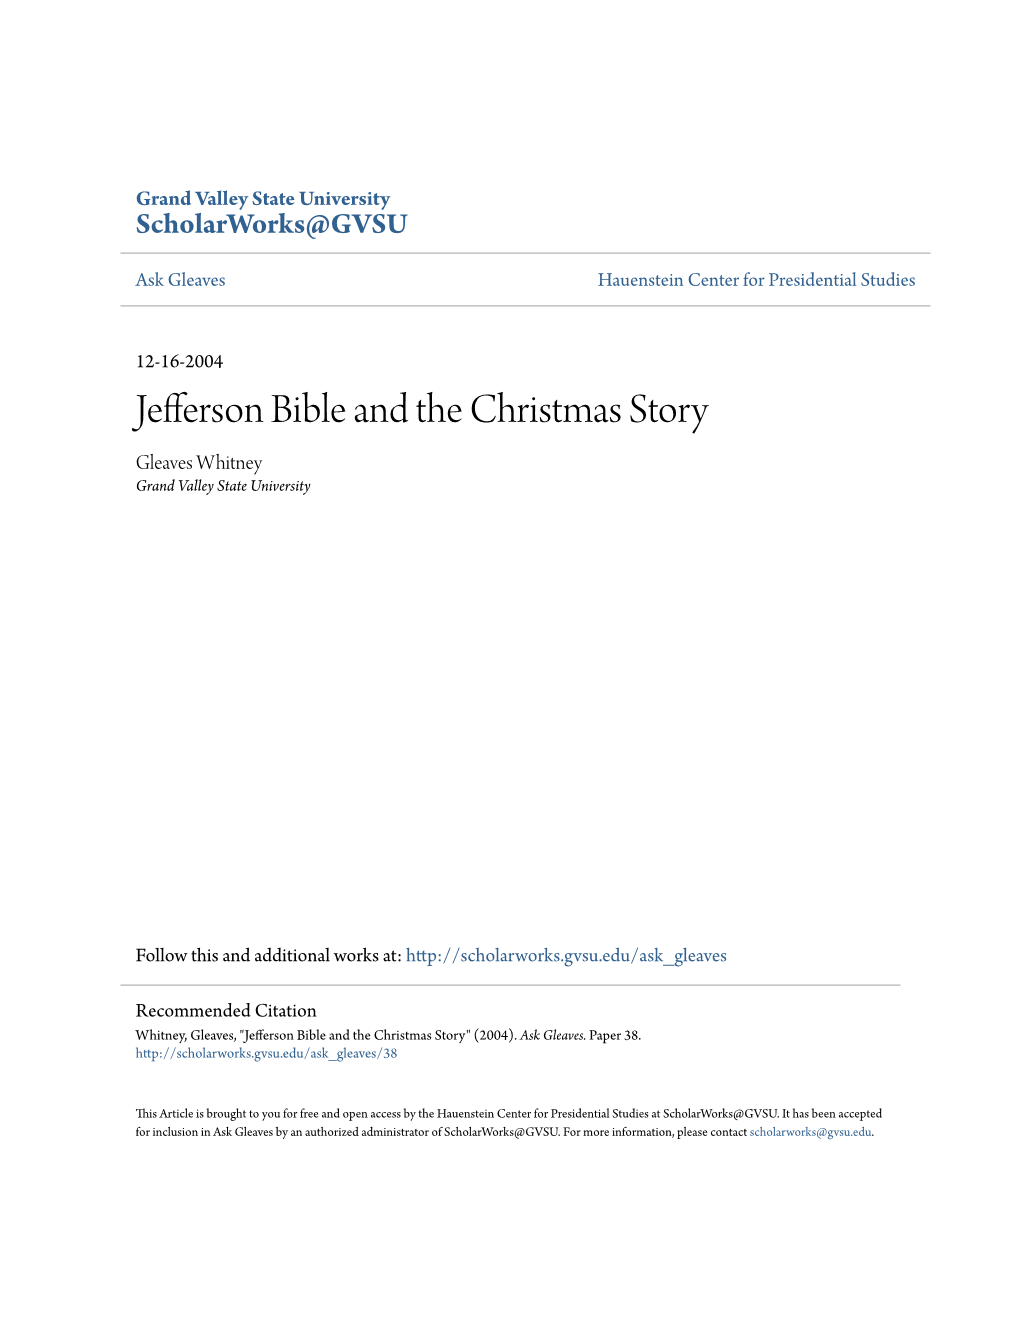 Jefferson Bible and the Christmas Story Gleaves Whitney Grand Valley State University